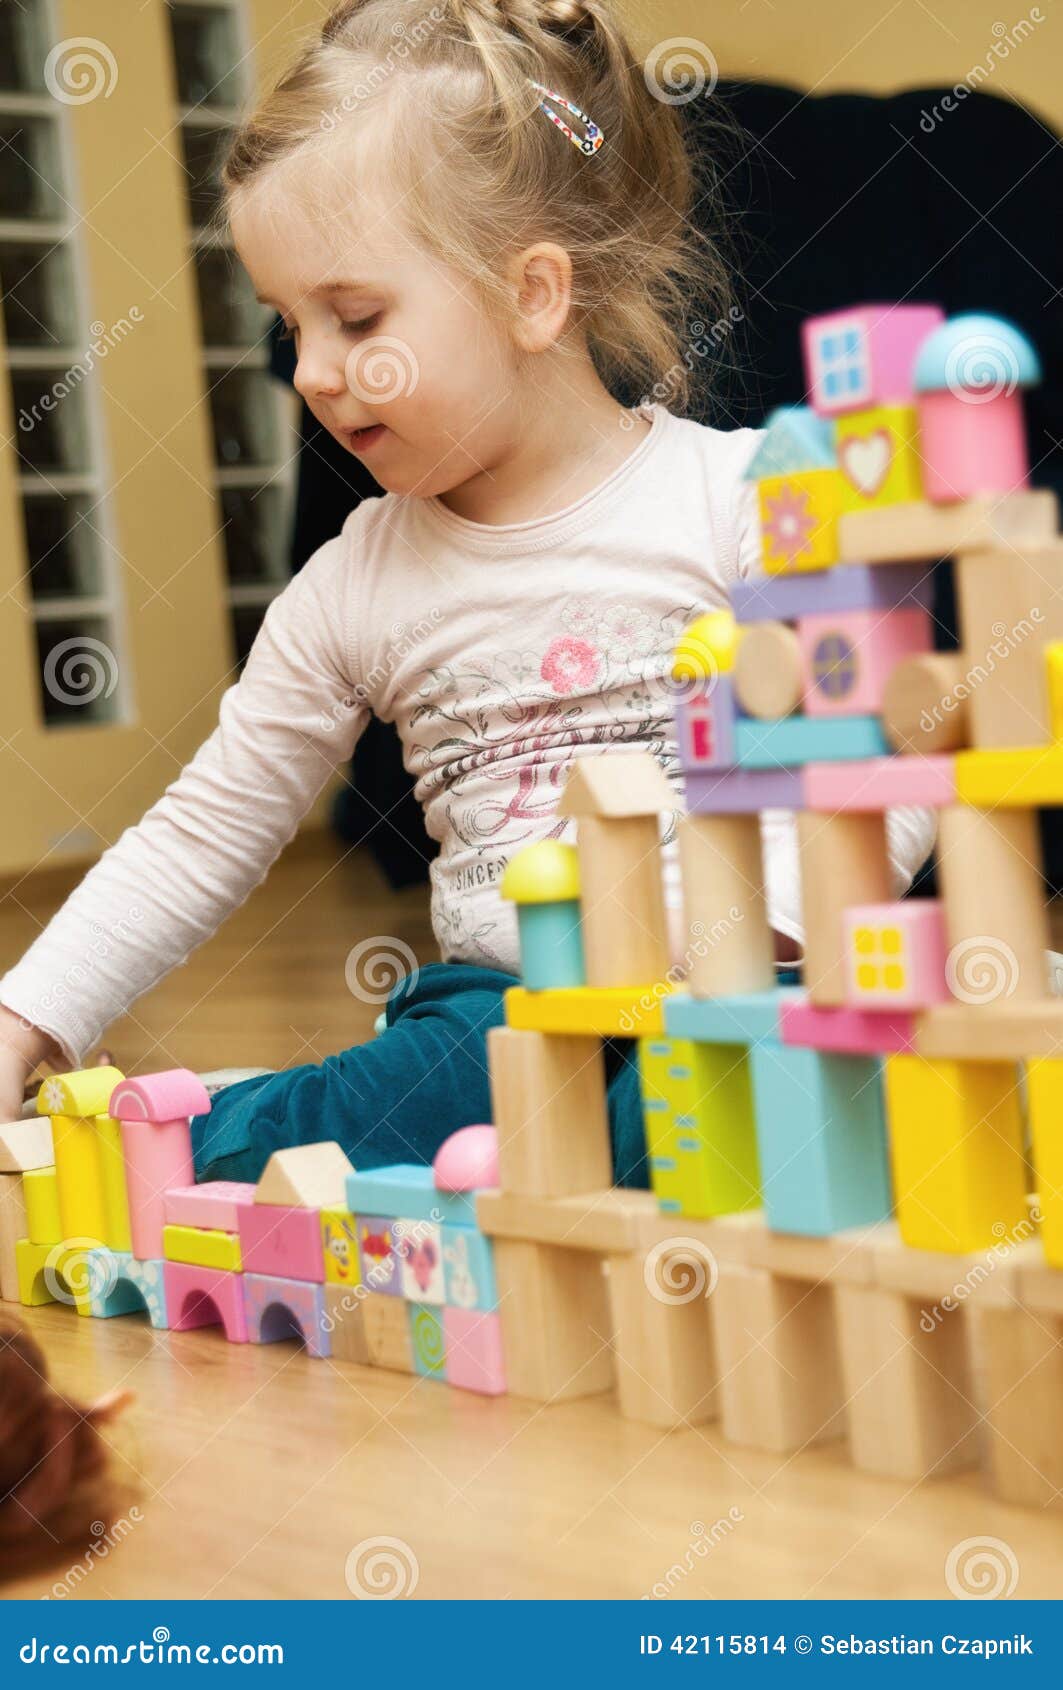 Girl With Wooden Toy Blocks Stock Photo - Image: 42115814